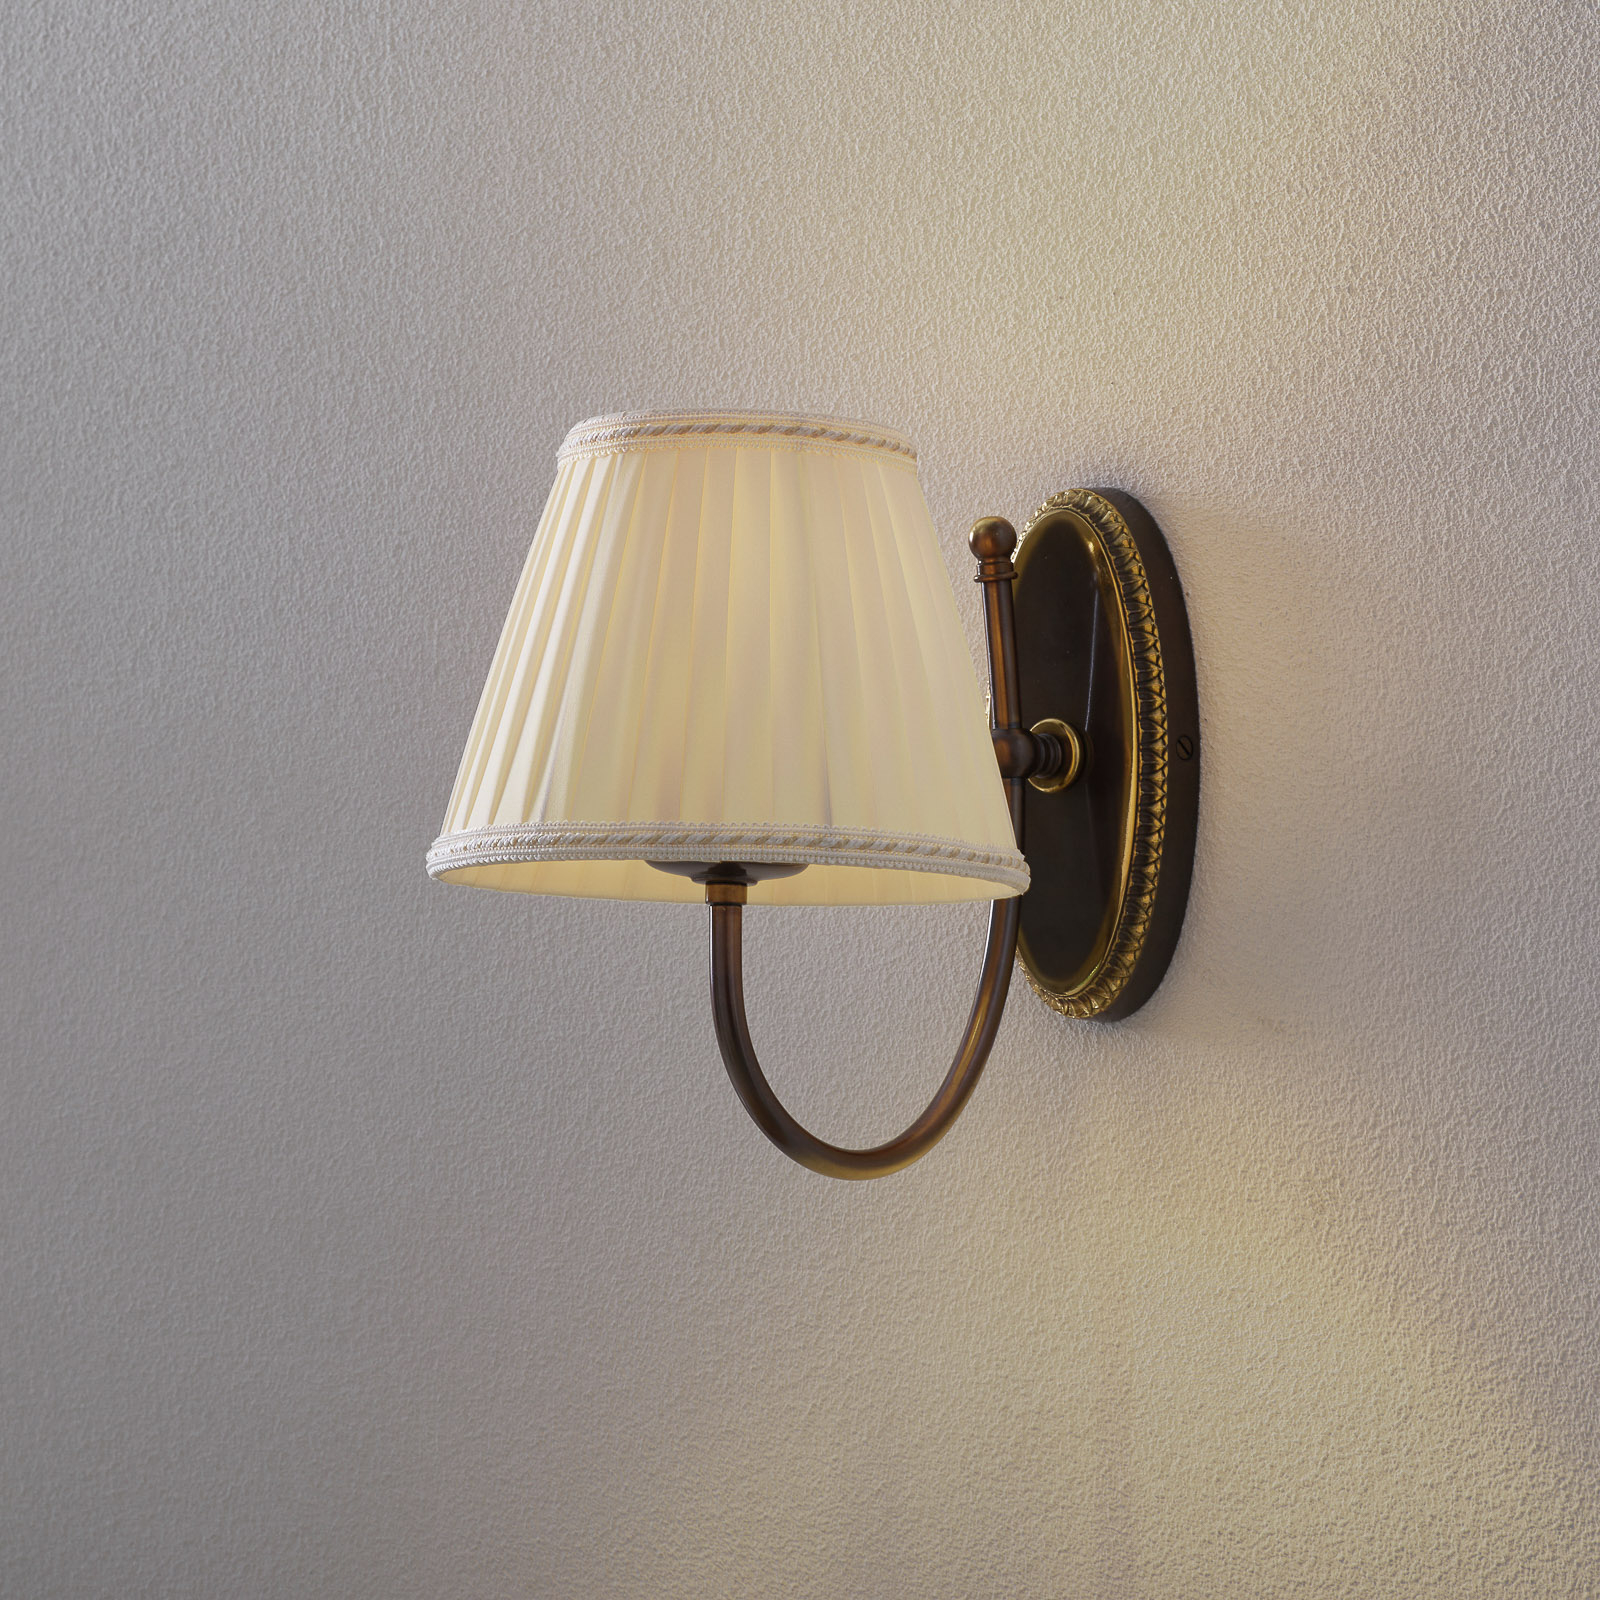 Classic - wall light with curved arm